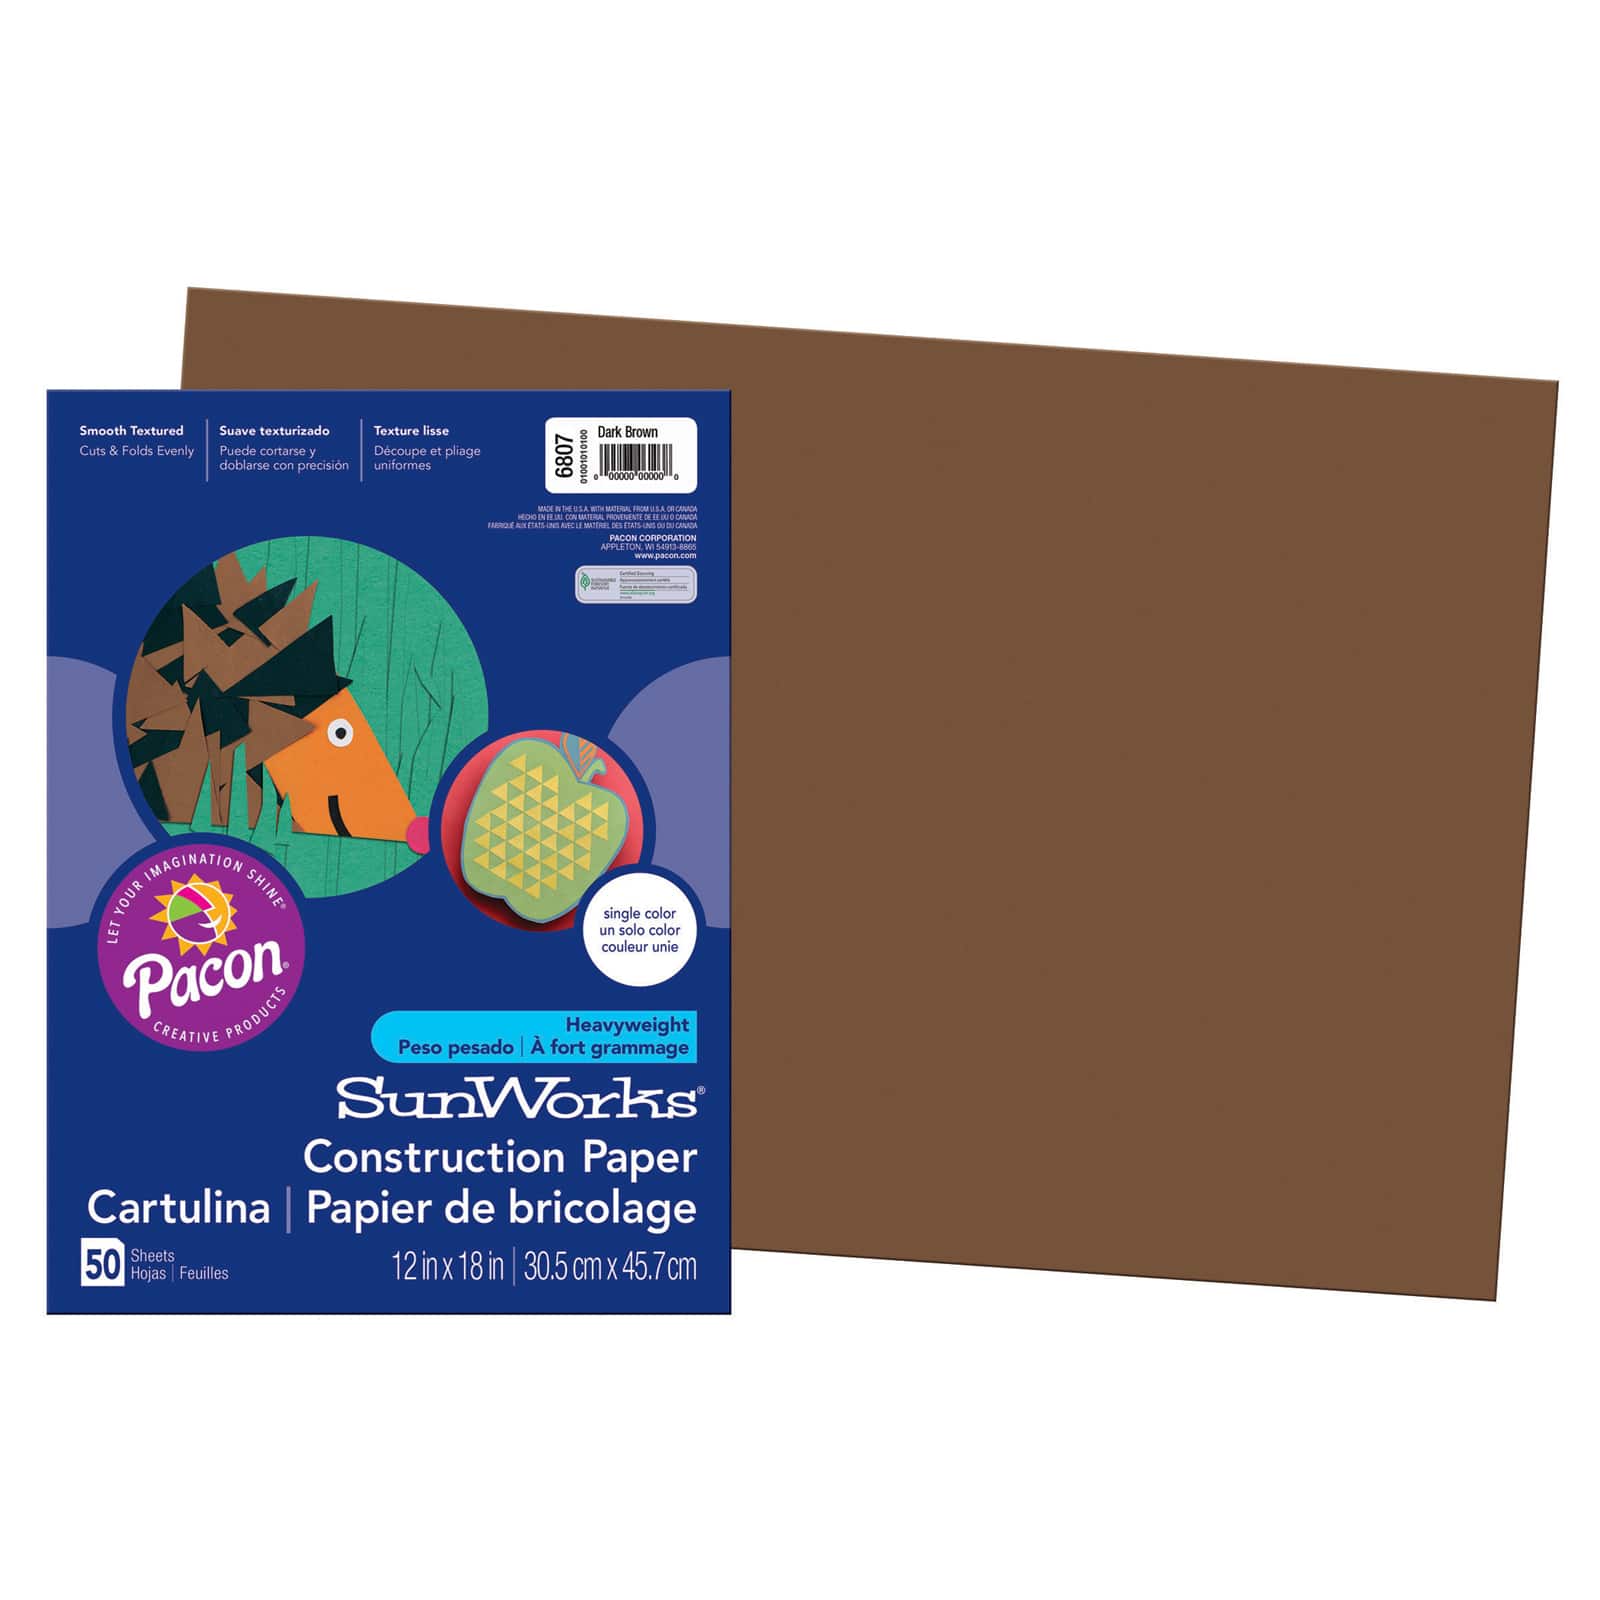 Colorations® Heavyweight Construction Paper, Brown, 9 x 12 - 200 Sheets